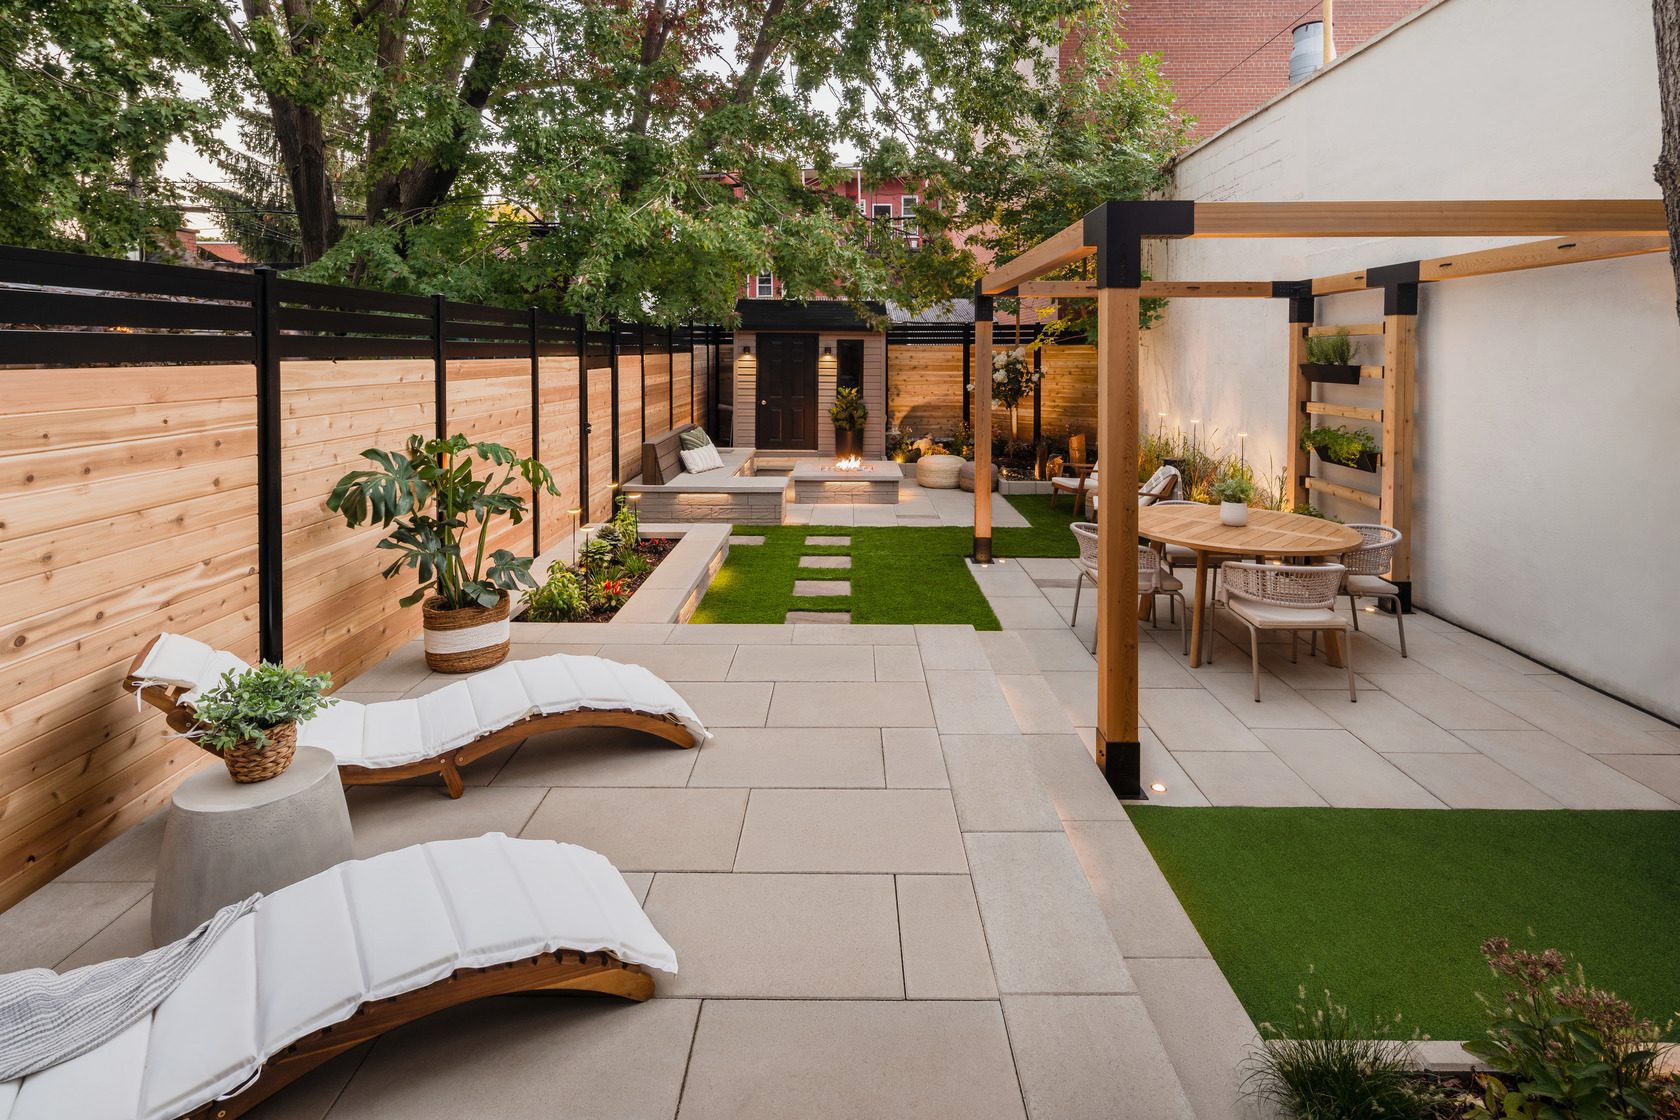 A backyard with lounge chairs, dining area, garden beds and firepit. 